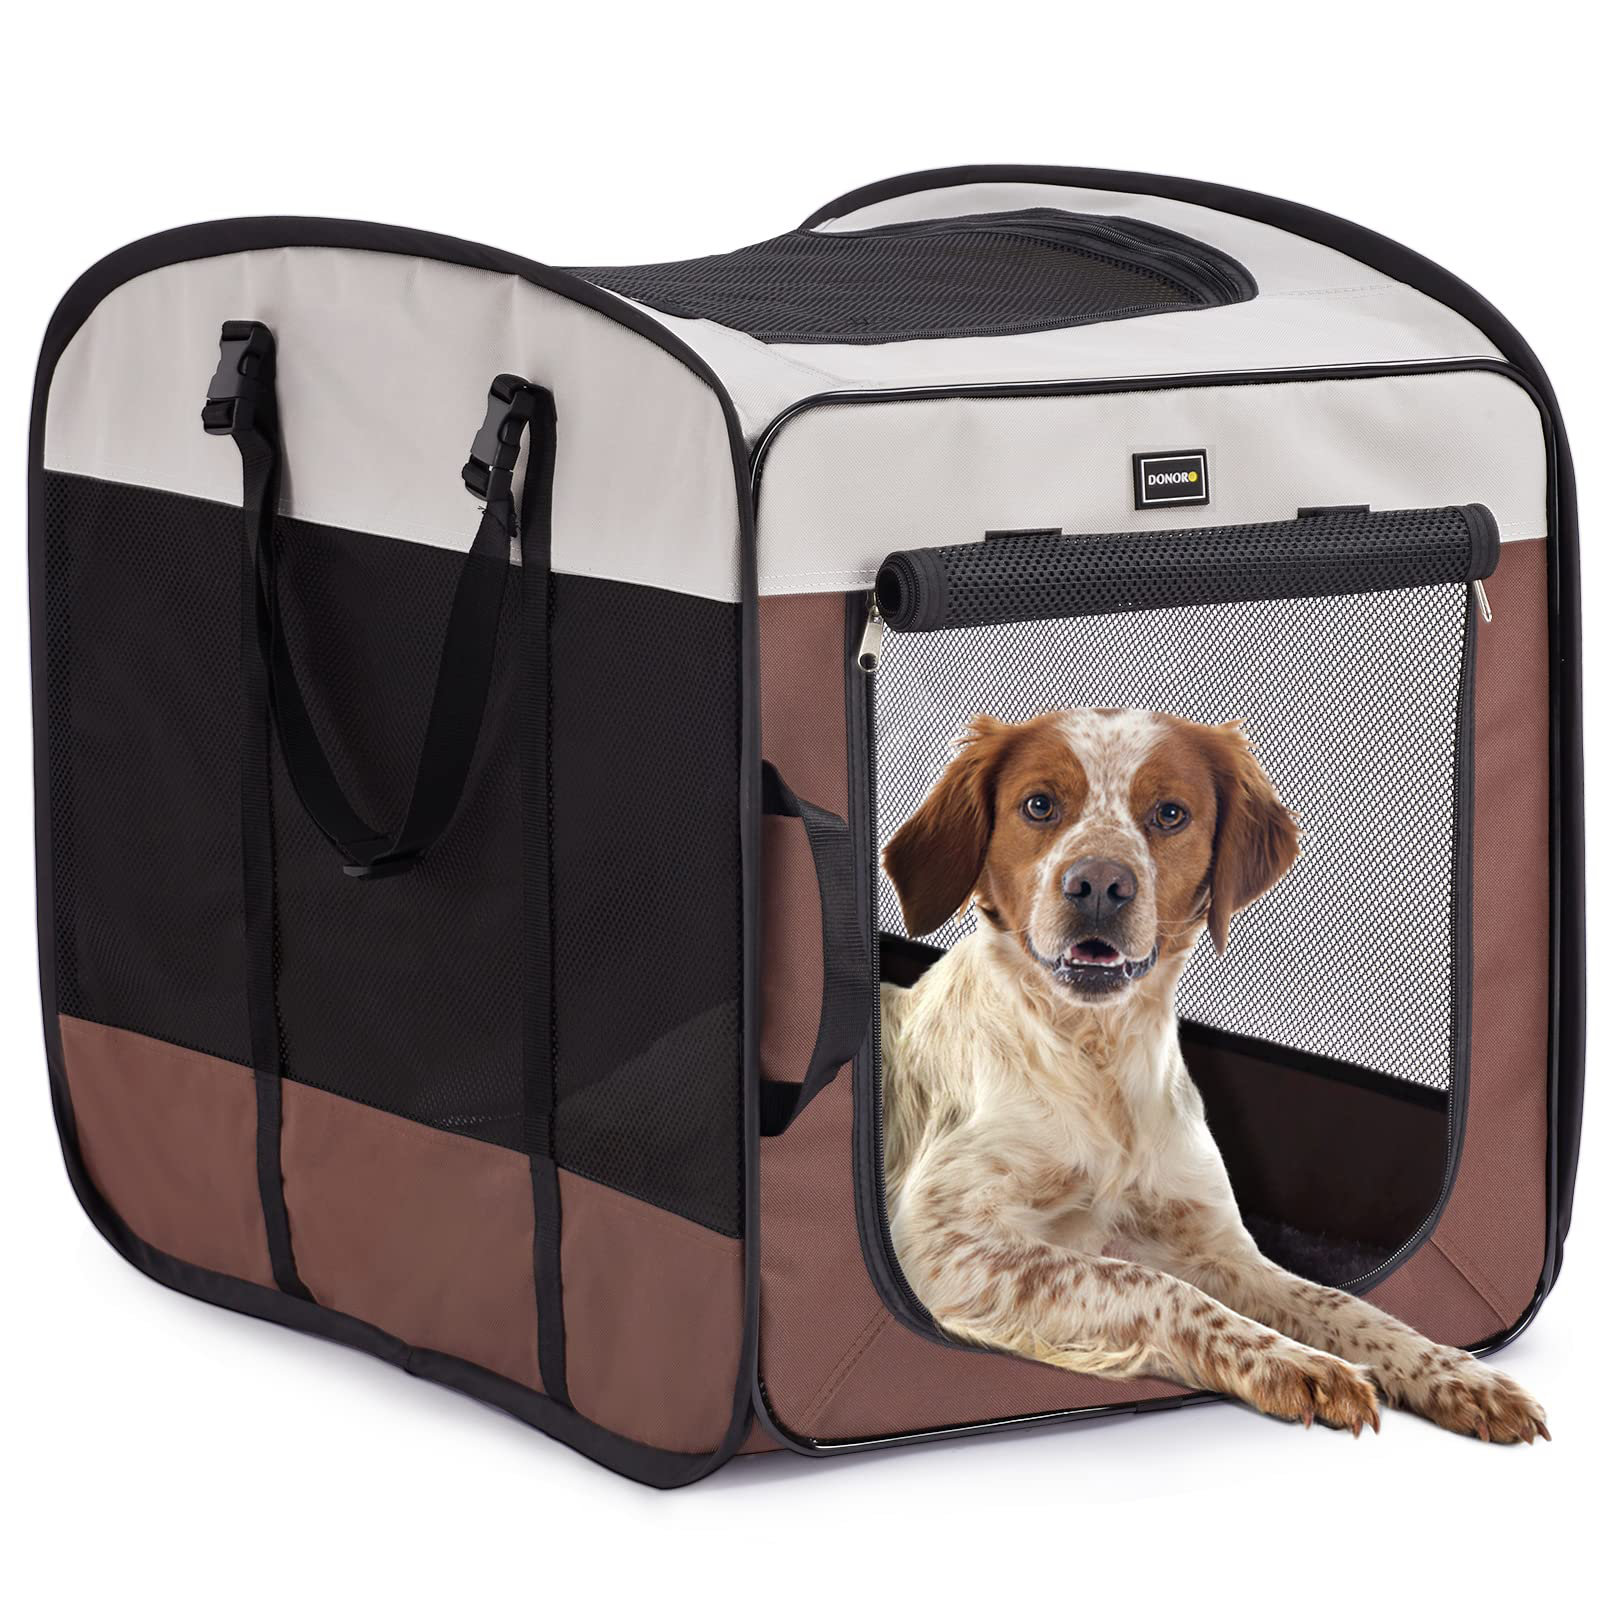 Portable Travel Foldable Cat Carrier Bag - Soft & Durable With Lid